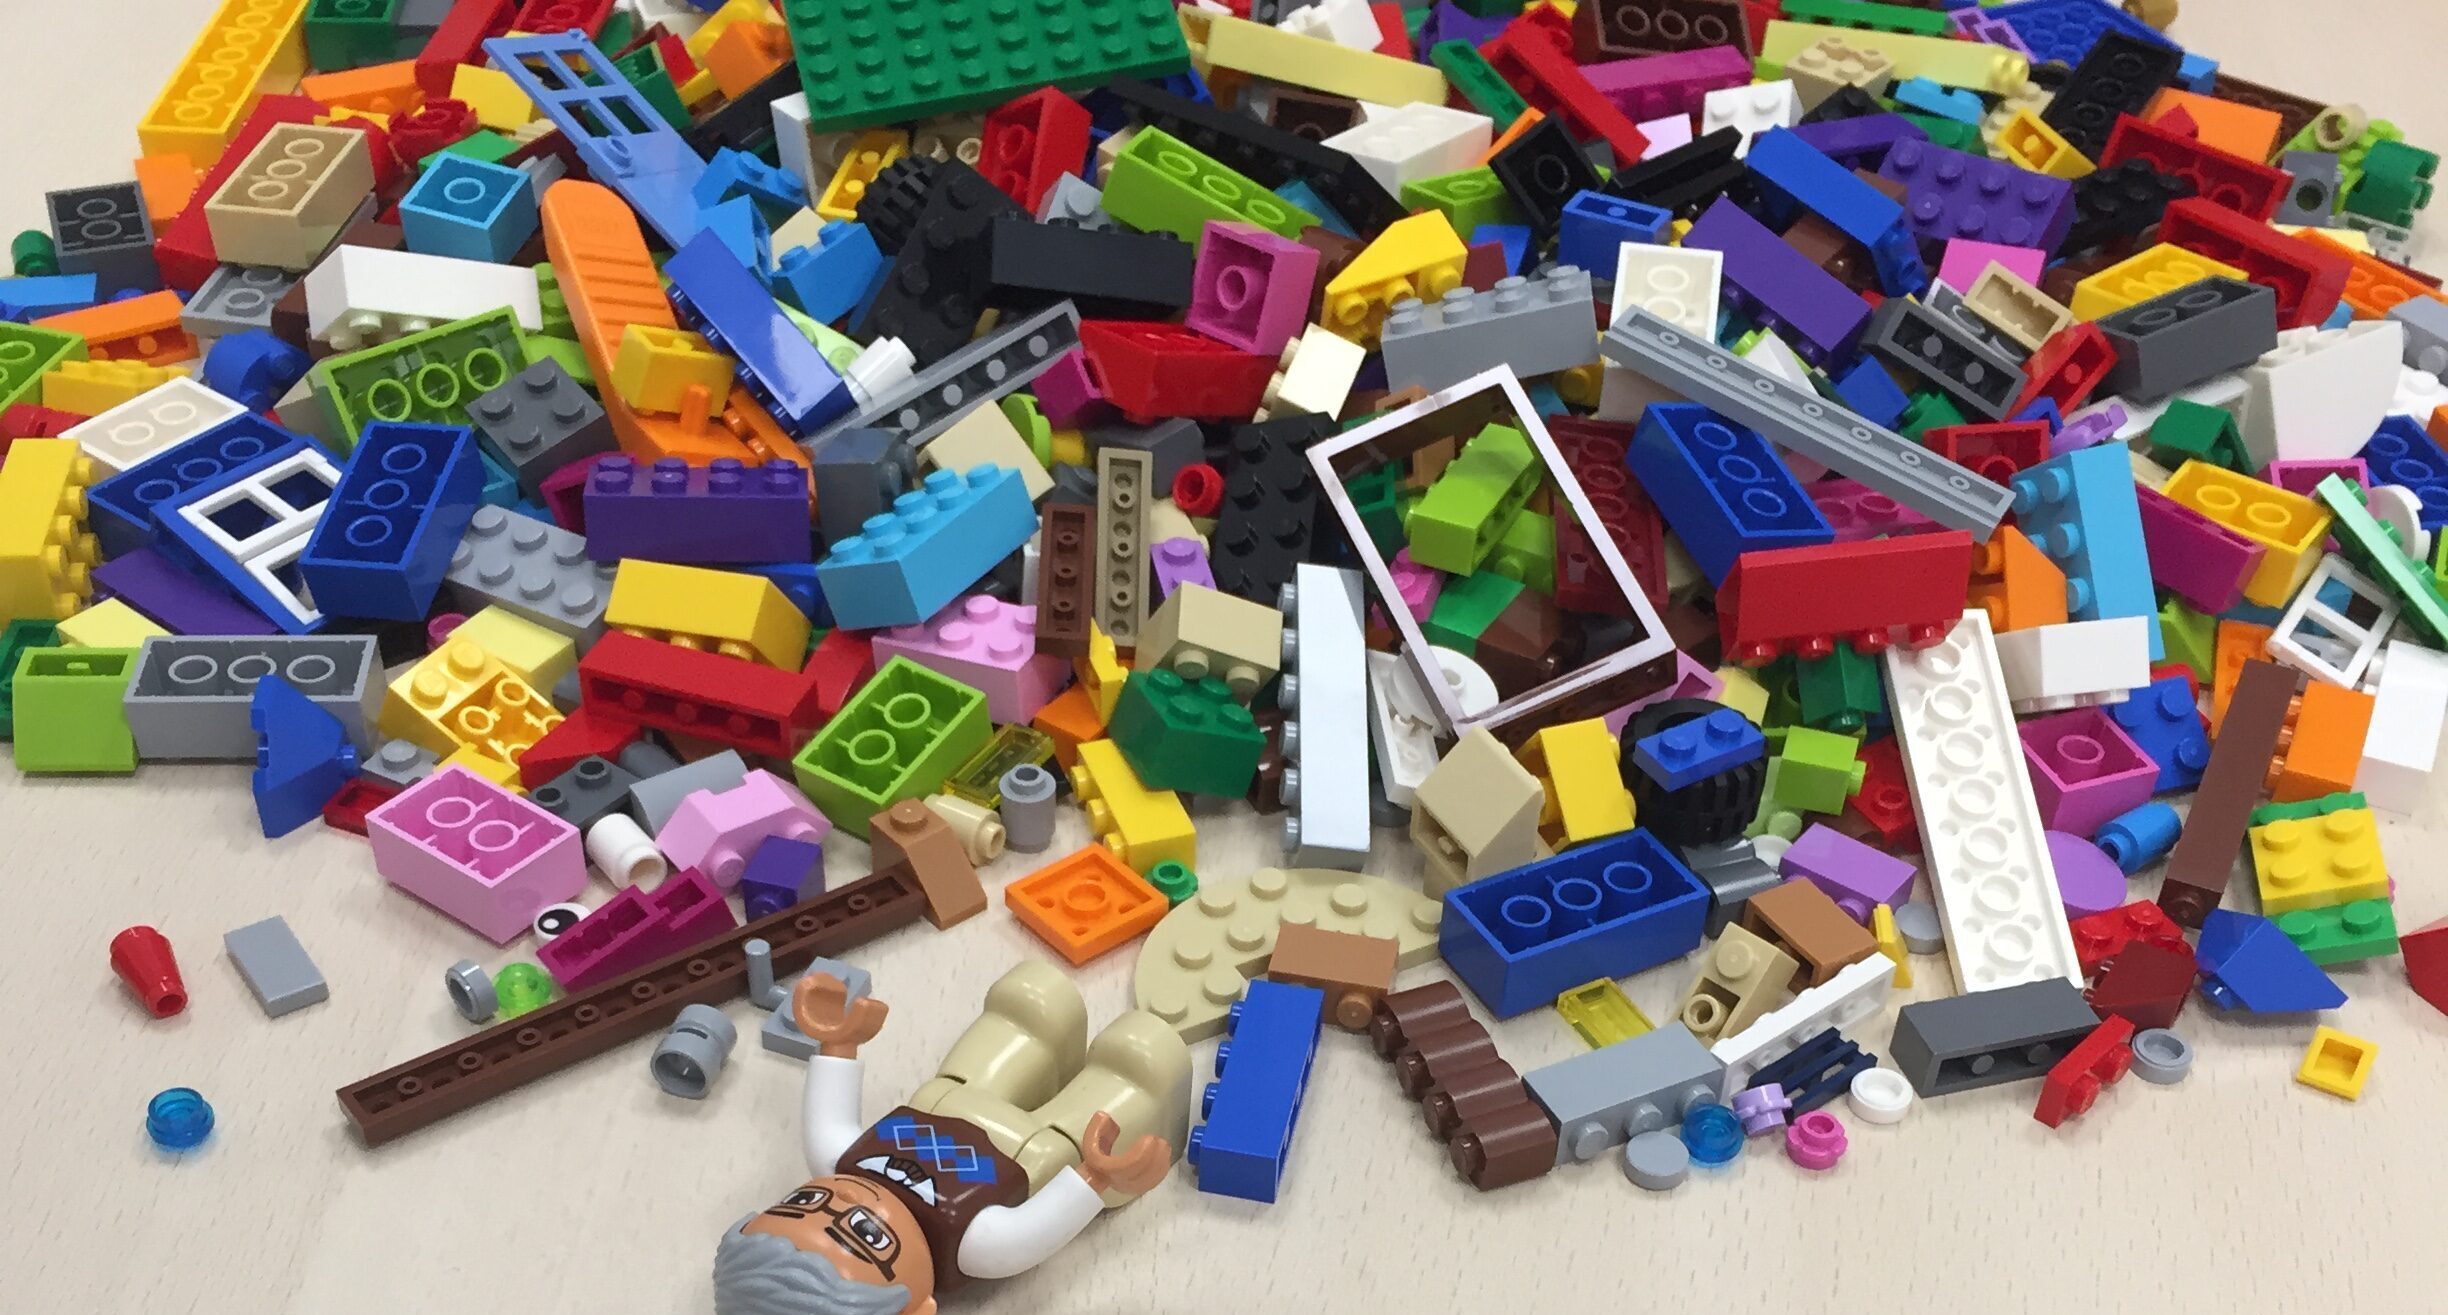 Creating a playful environment with Lego.